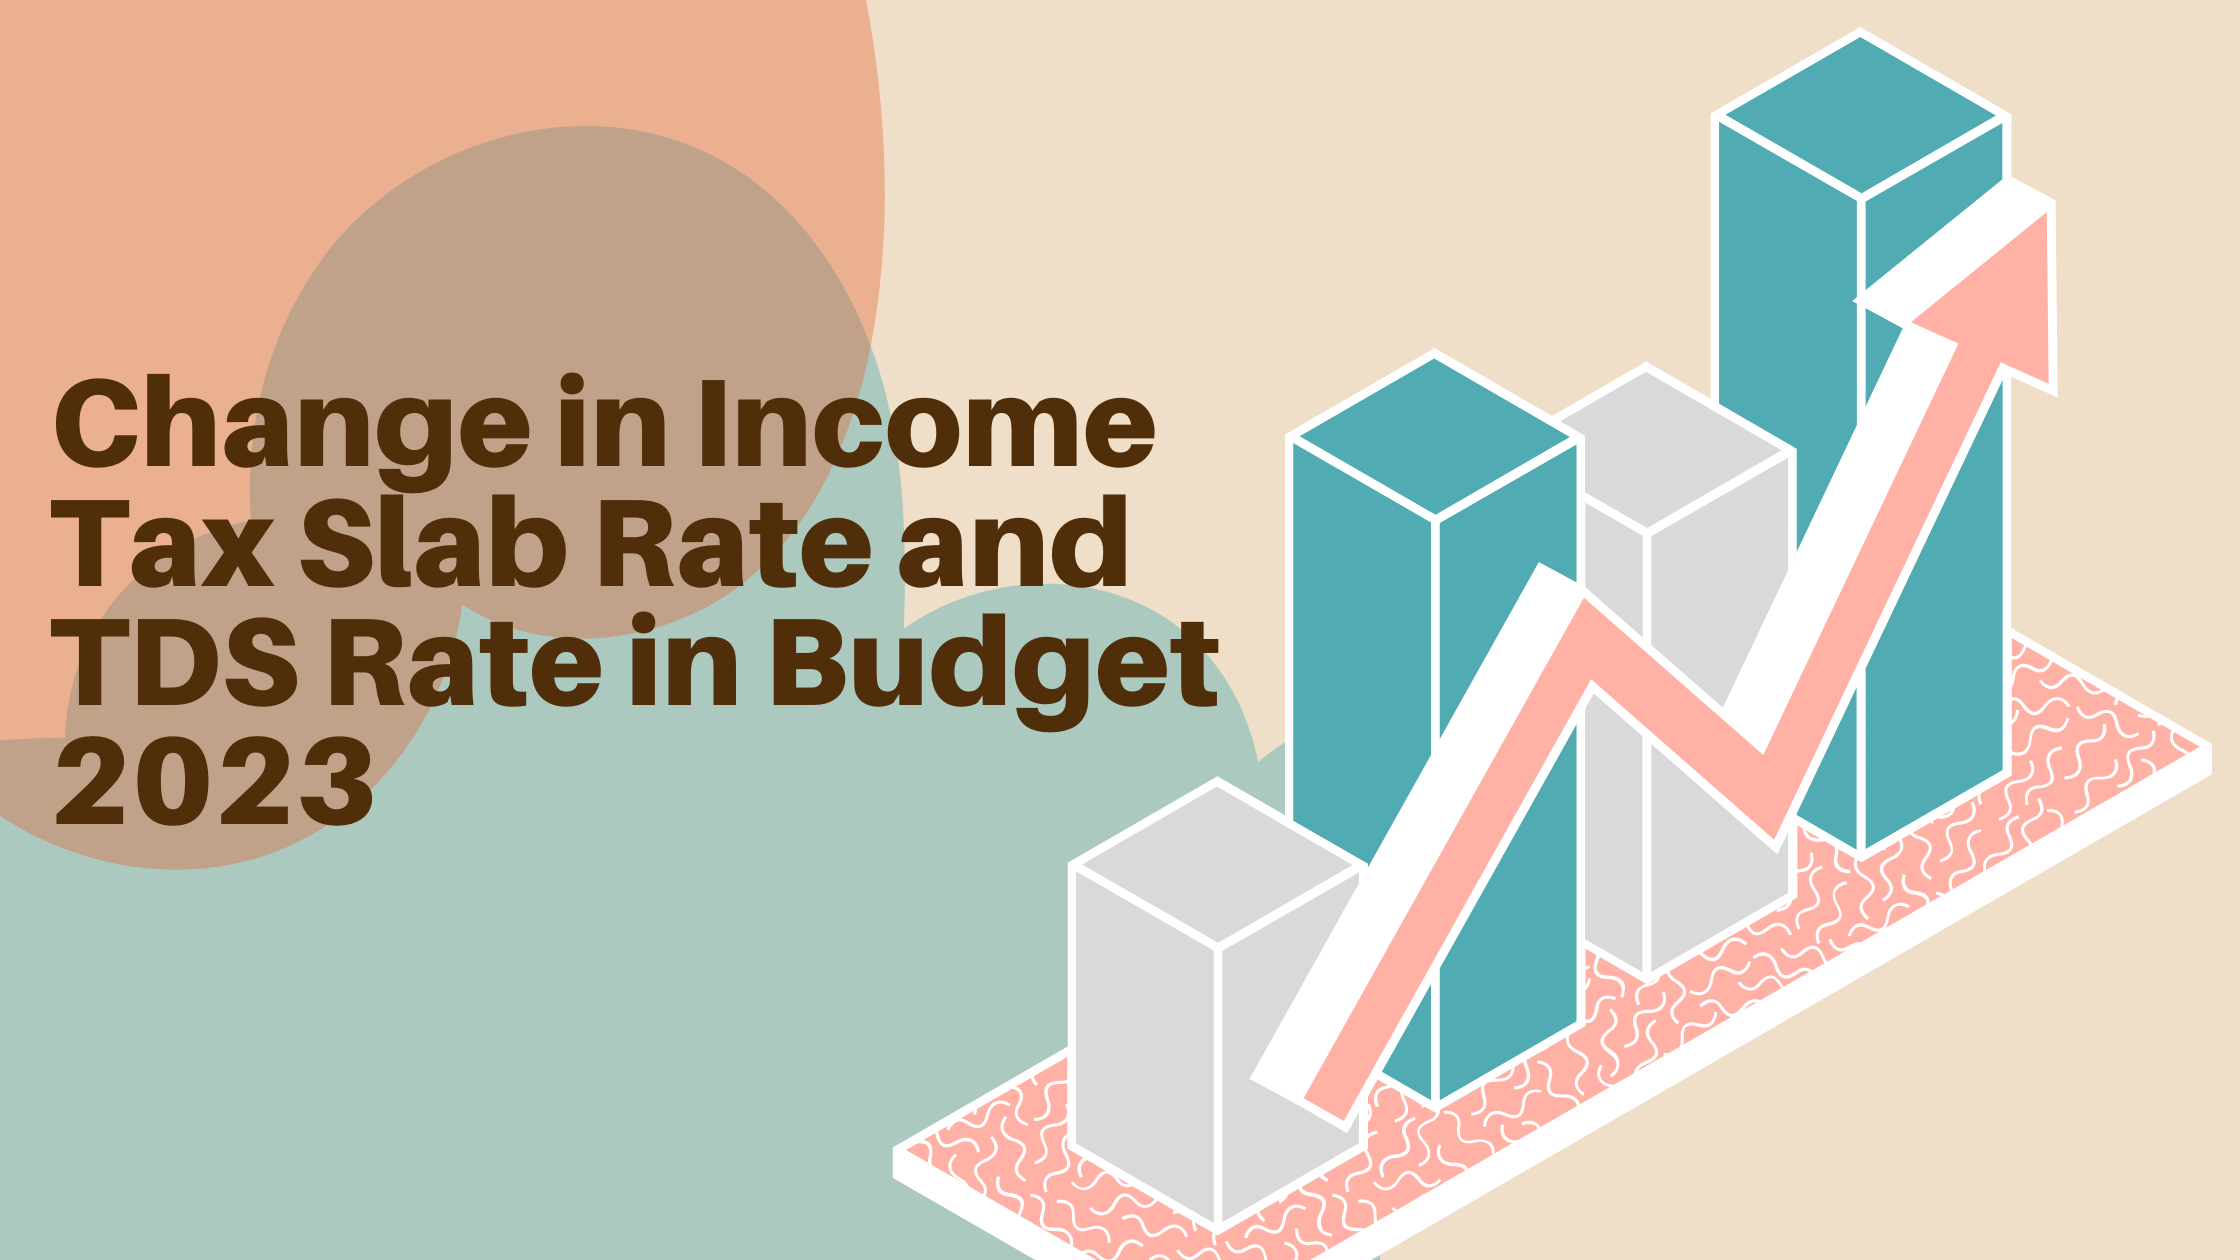 Income Tax Relief – Change in Income Tax Slab Rate and TDS Rate in Budget 2023